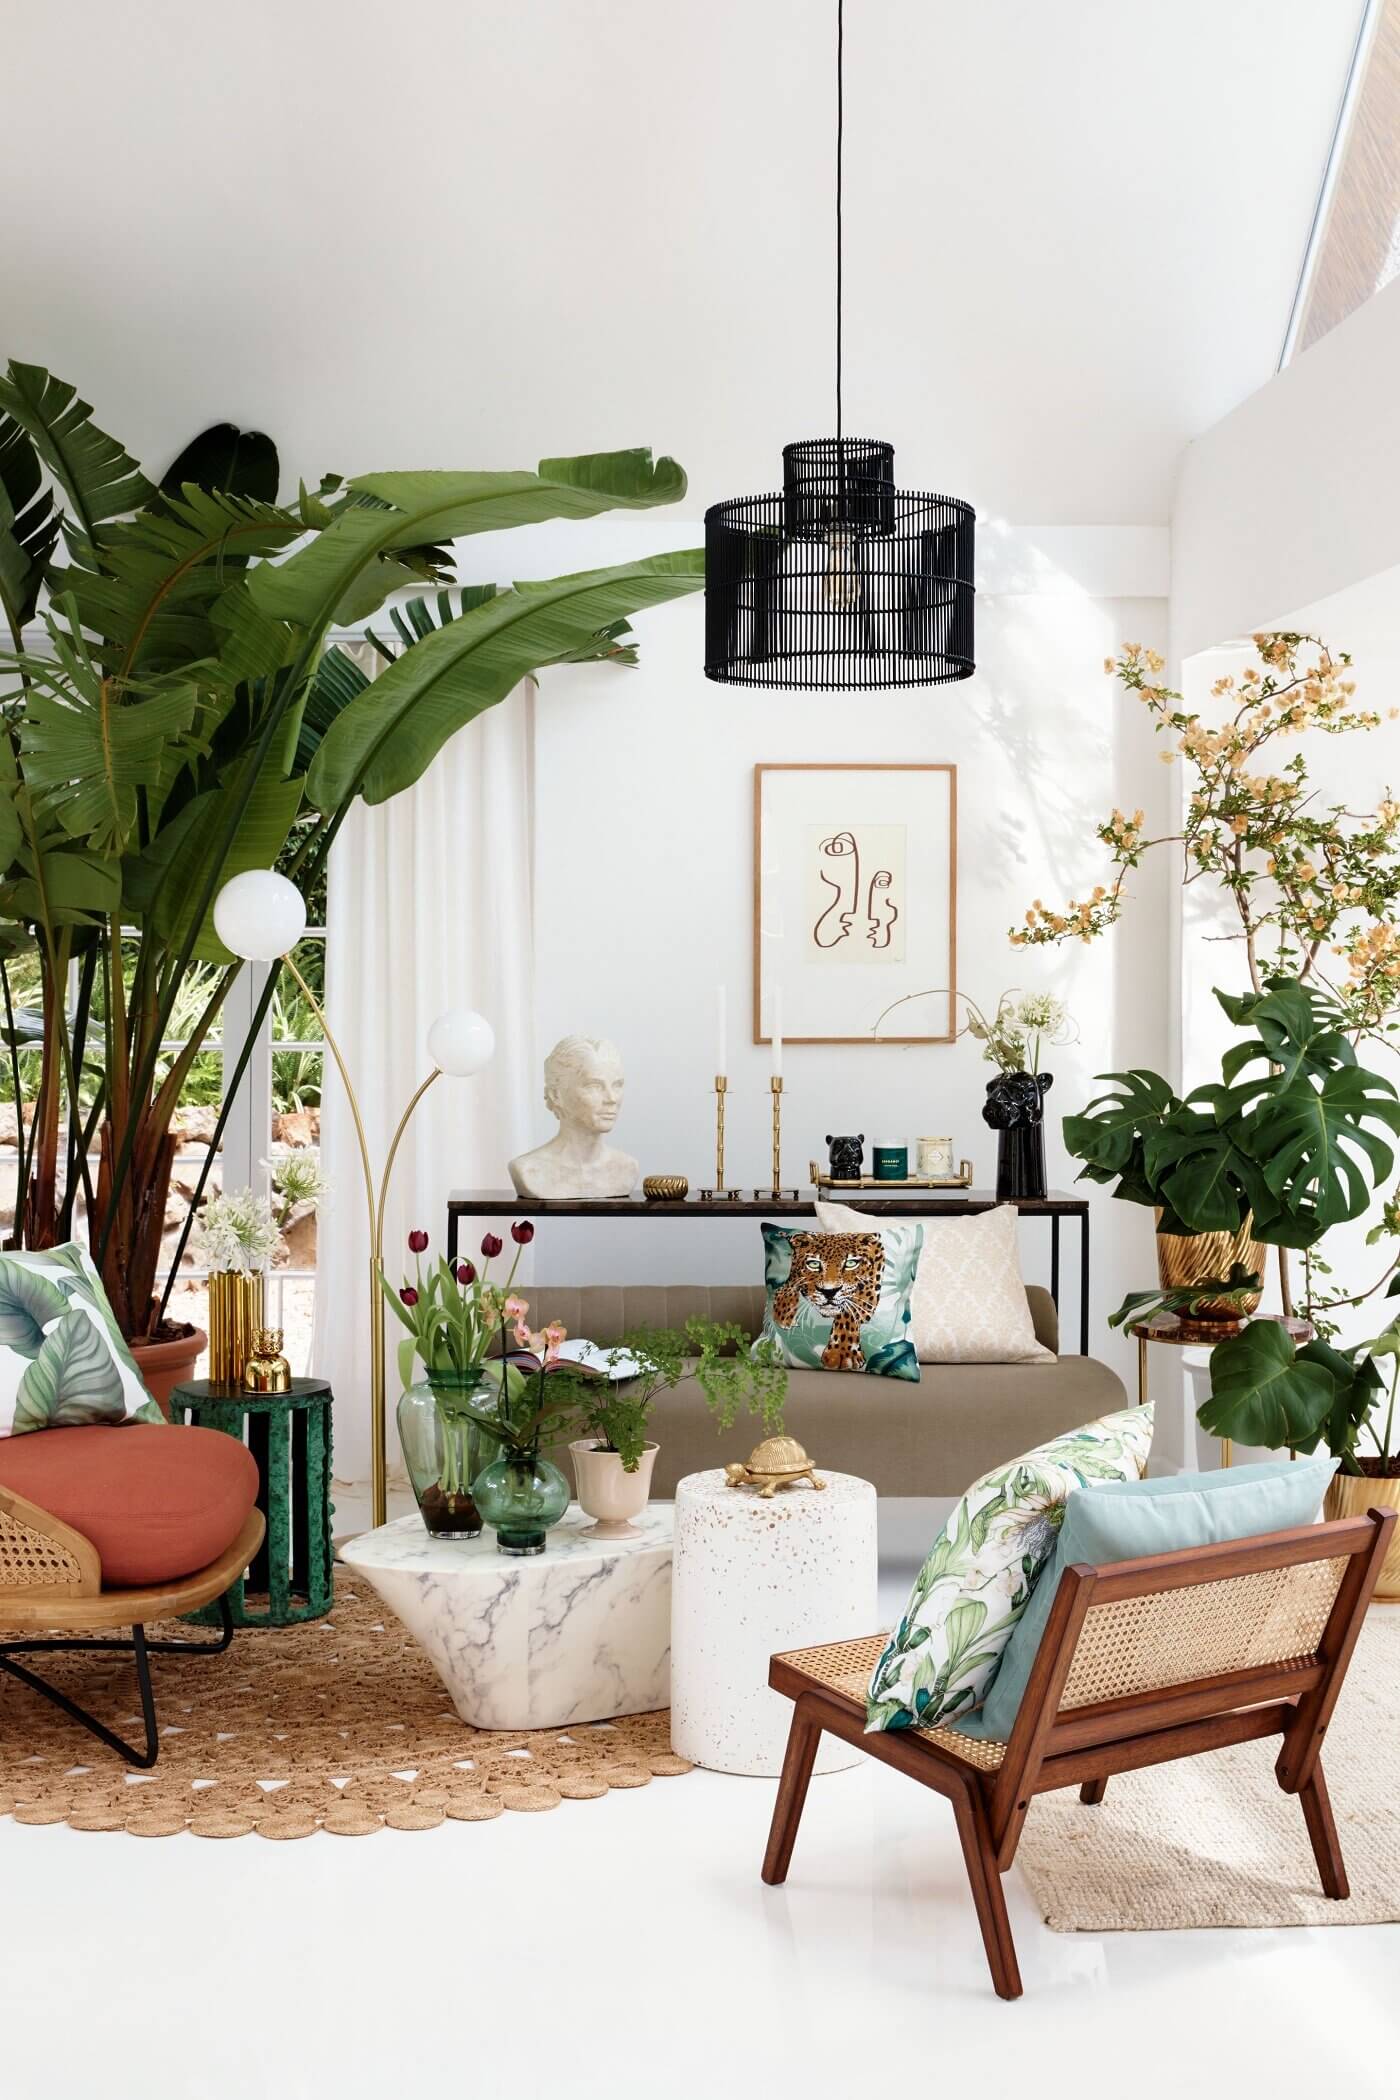 The H&M Home Spring Collection Brings Nature Into Your Home